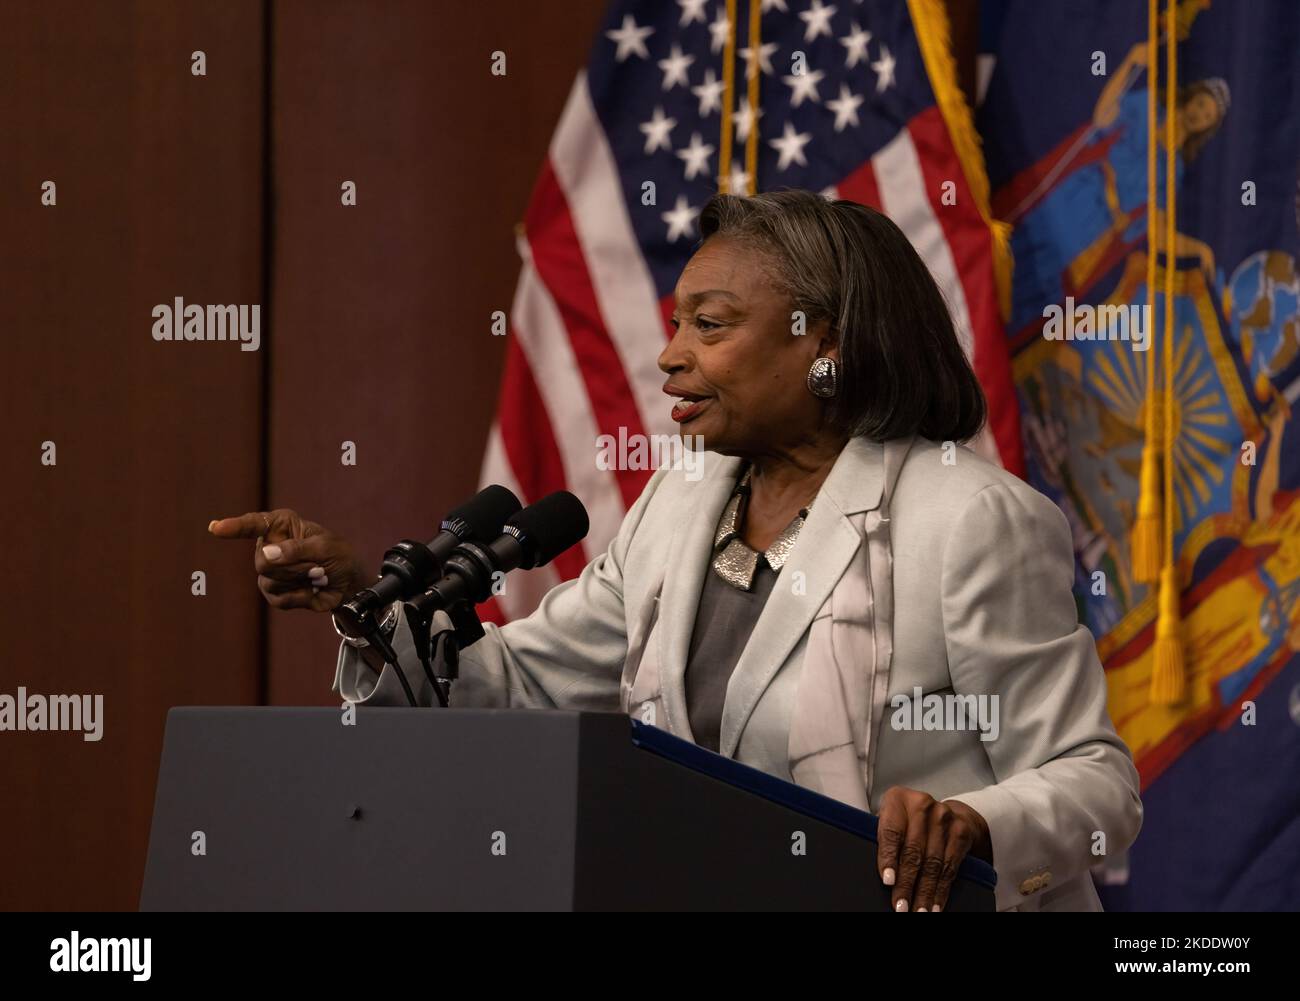 NEW YORK, N.Y. – November 3, 2022: New York State Senate Majority Leader Andrea Stewart-Cousins (D) addresses a campaign rally at Barnard College. Stock Photo